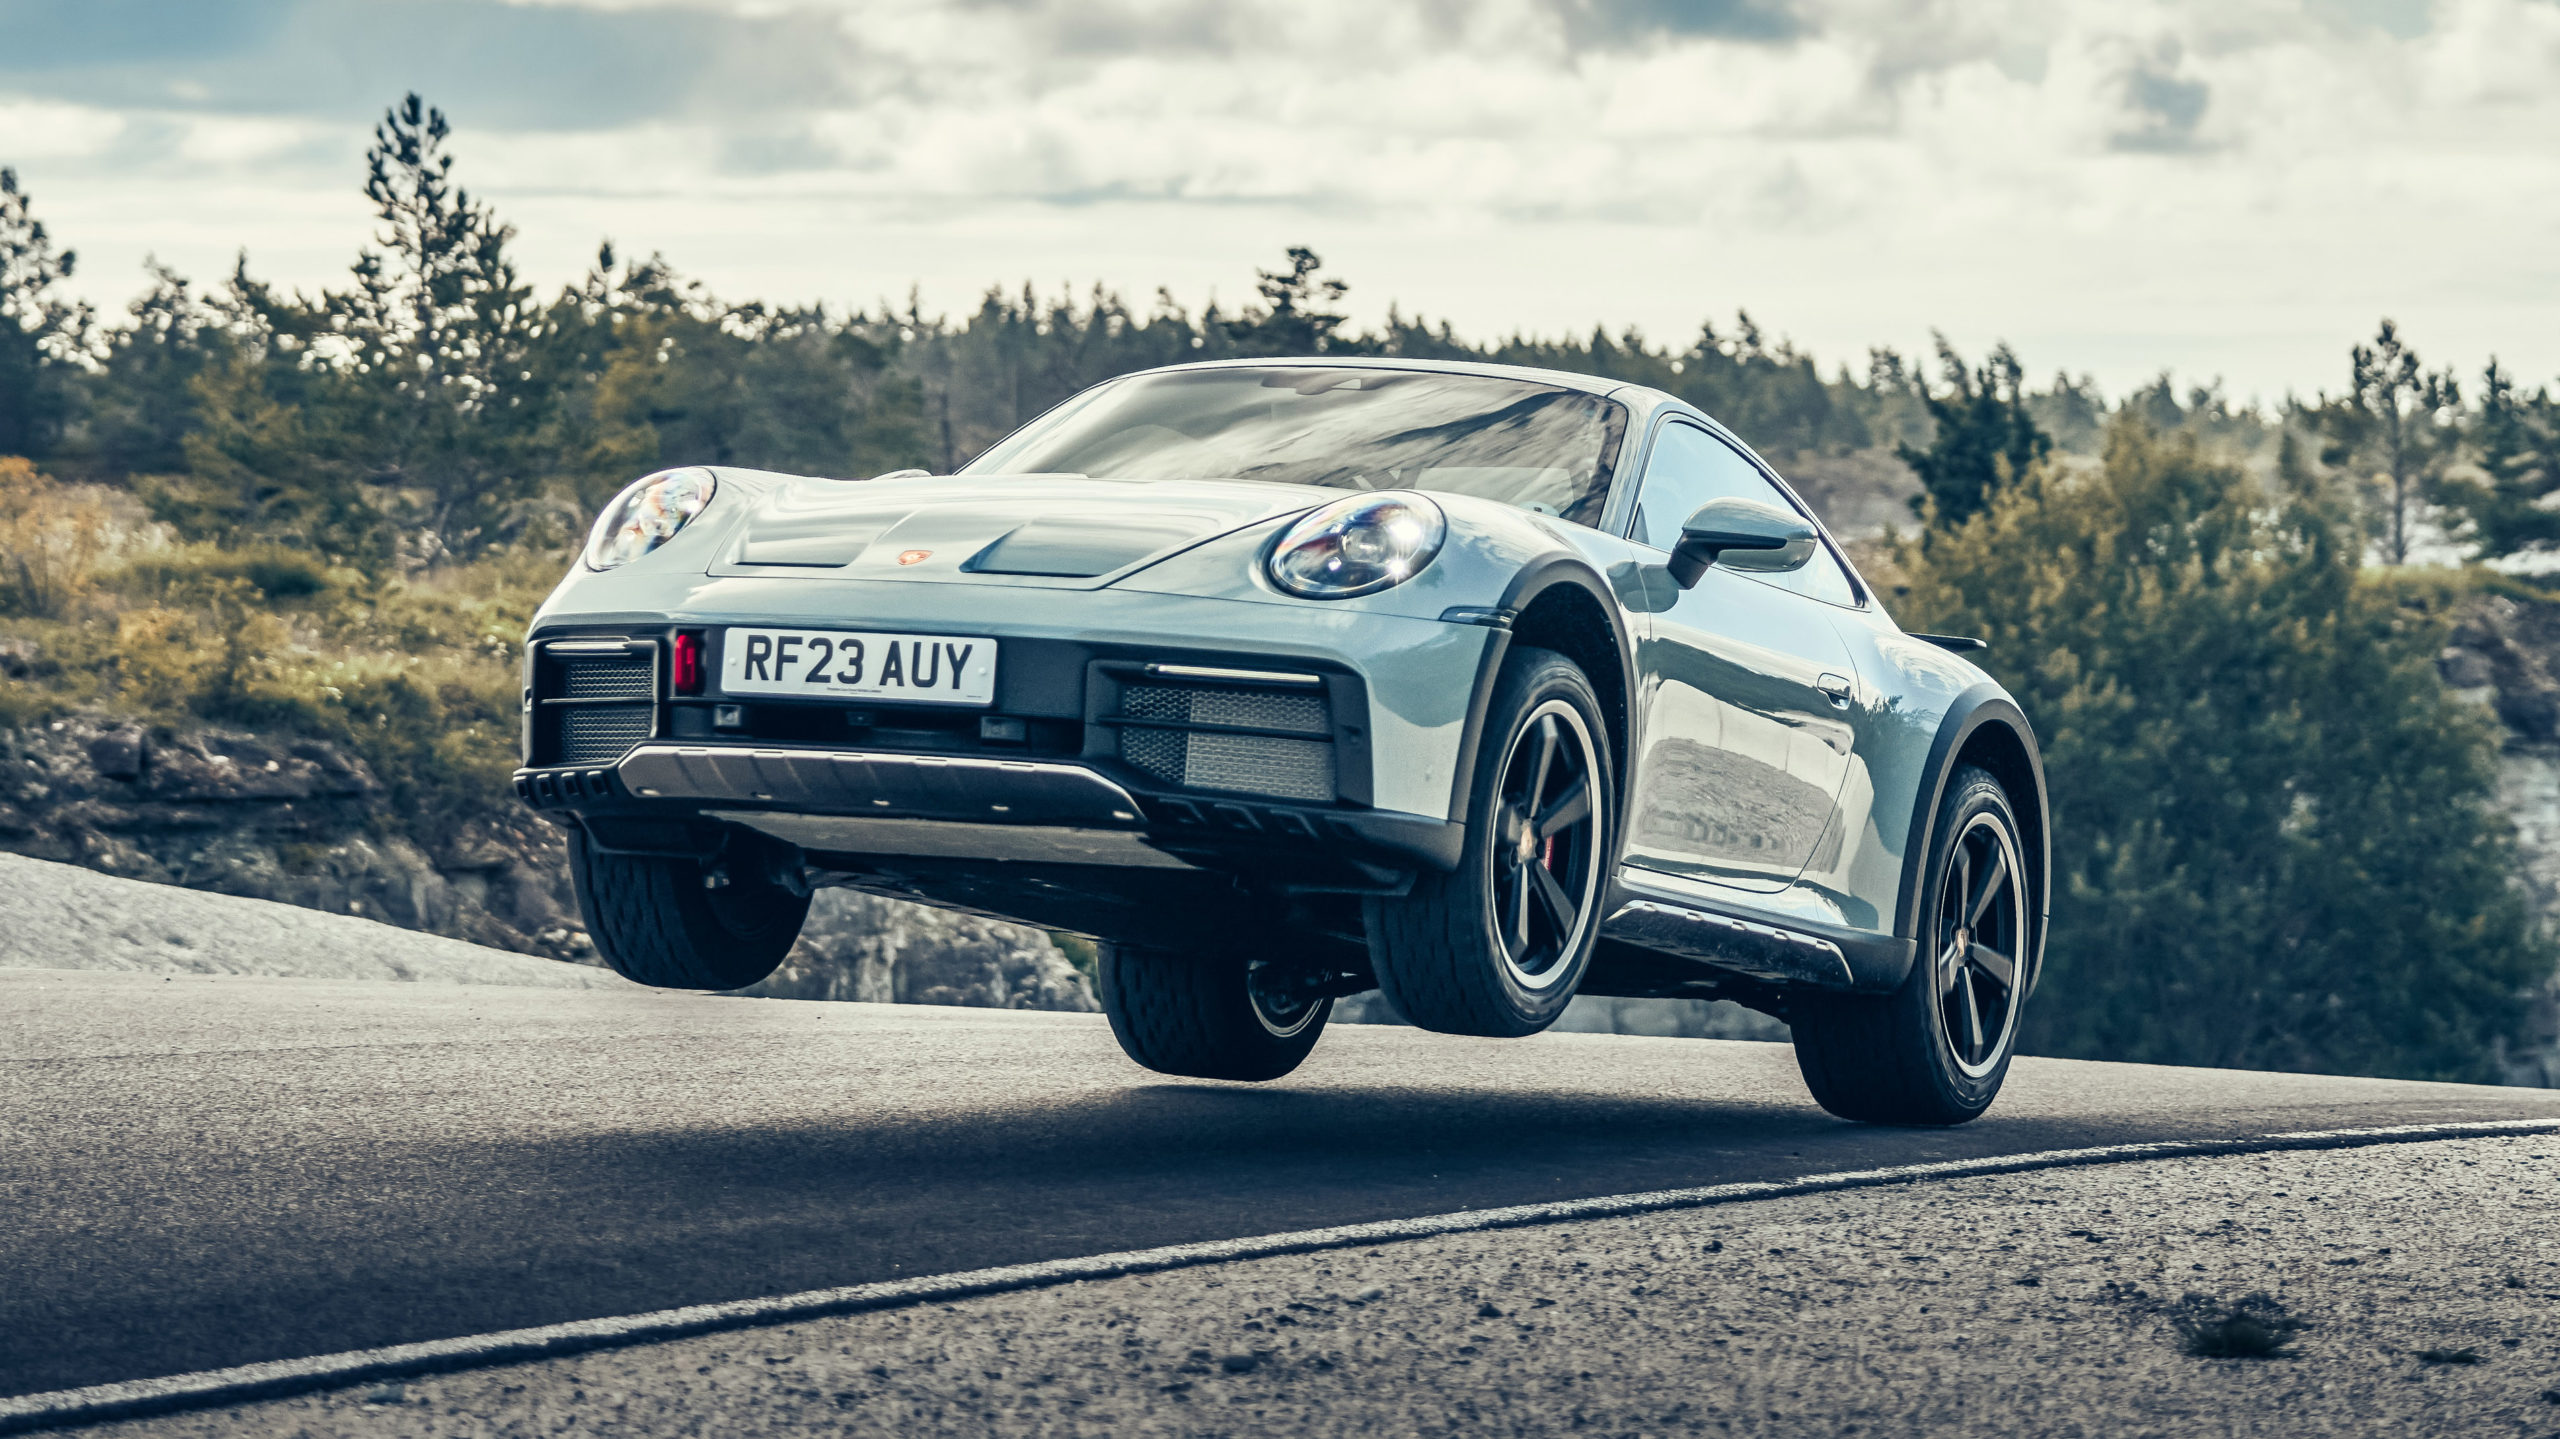 here's how the aero works on the porsche 911 gt3 rs